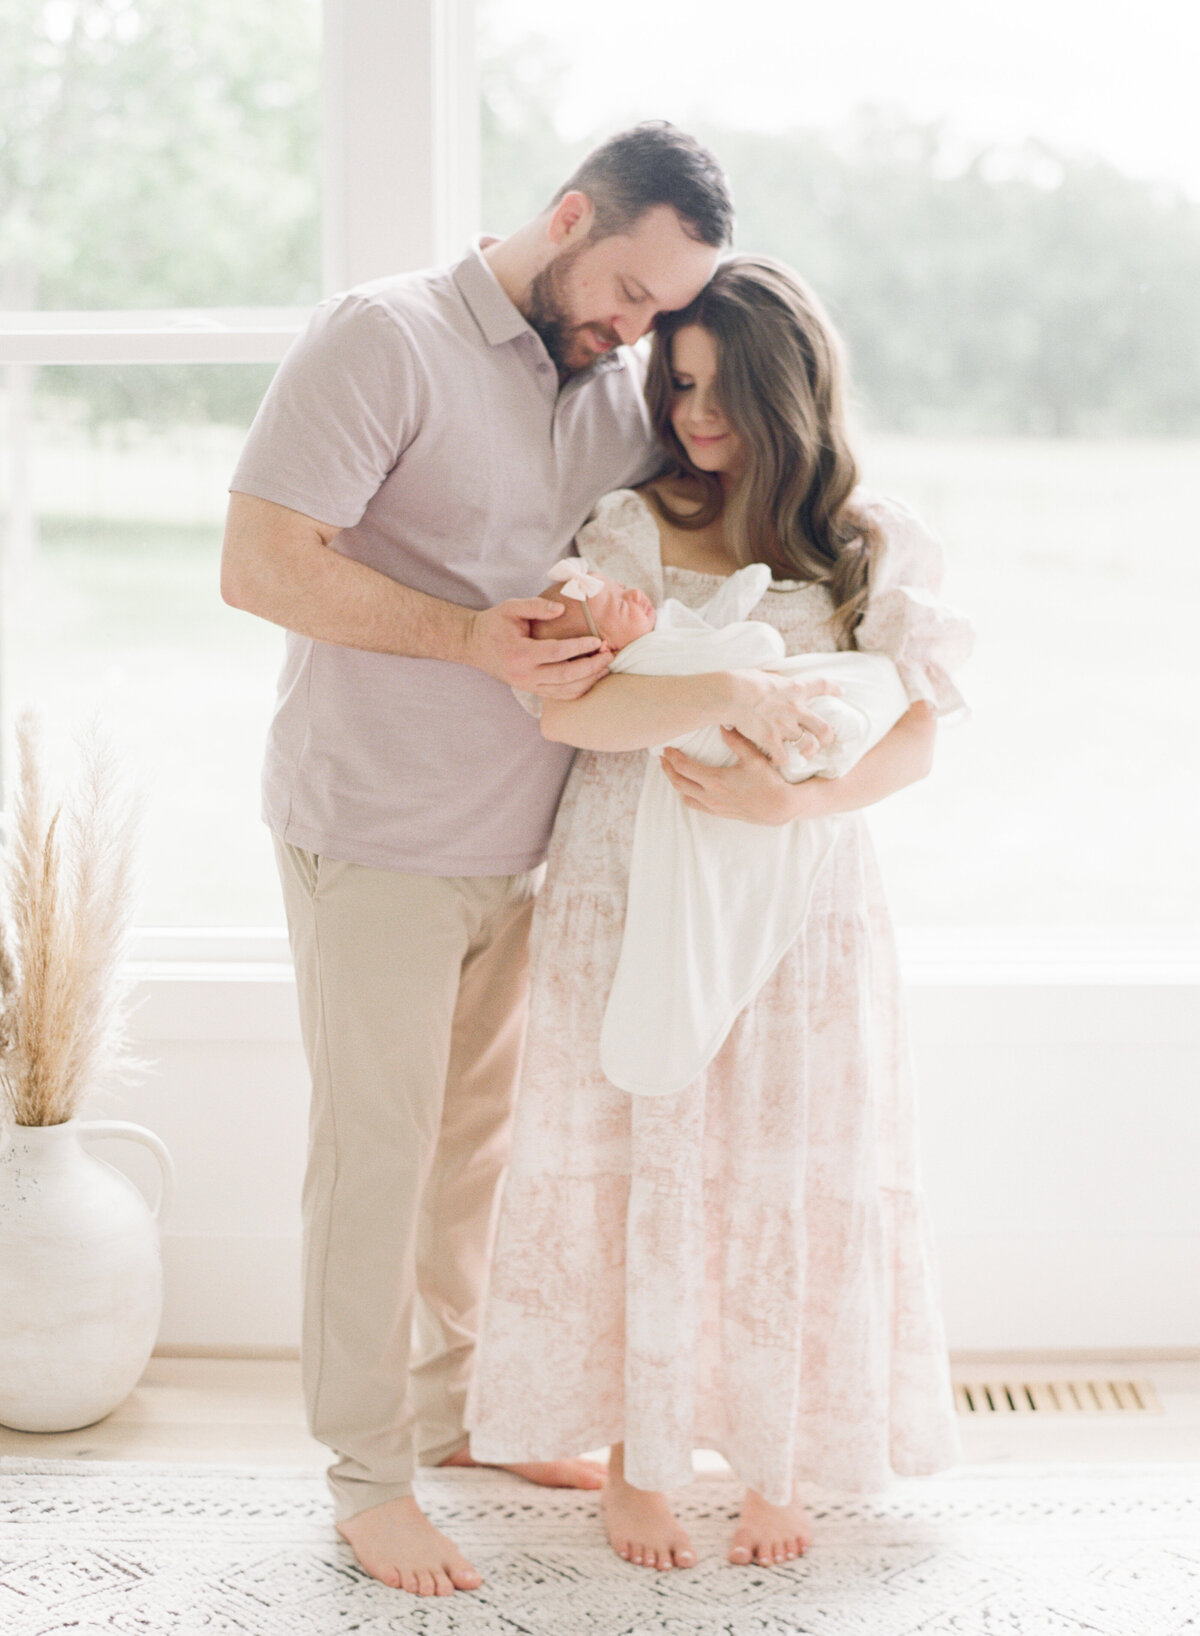 new parents snuggling their newborn daughter. Image by Raleigh newborn photographer A.J. Dunlap Photography.